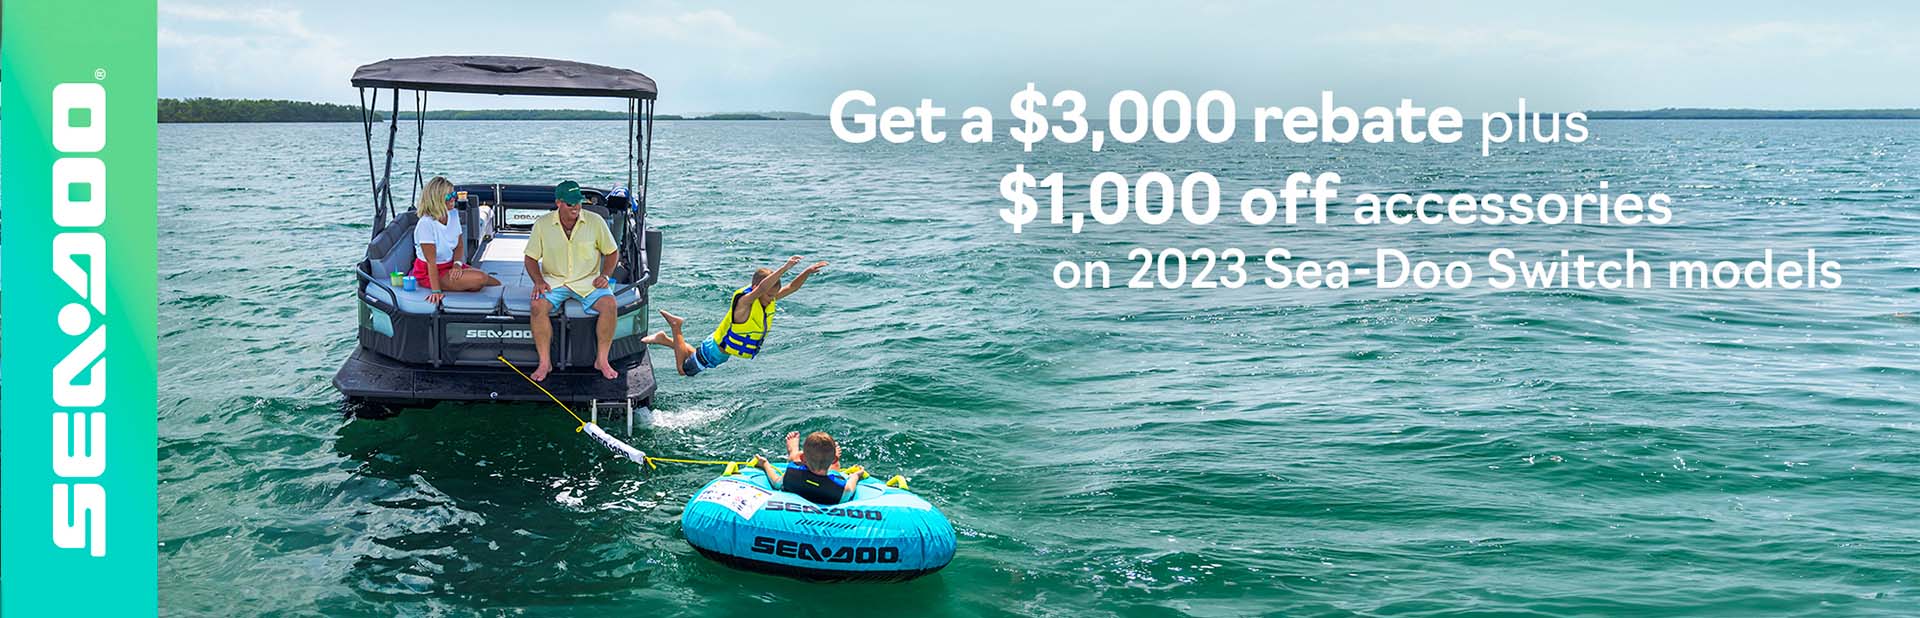 Get a $3,000 rebate + $1,000 off accessories on all 2023 Sea-Doo Switch Pontoons!